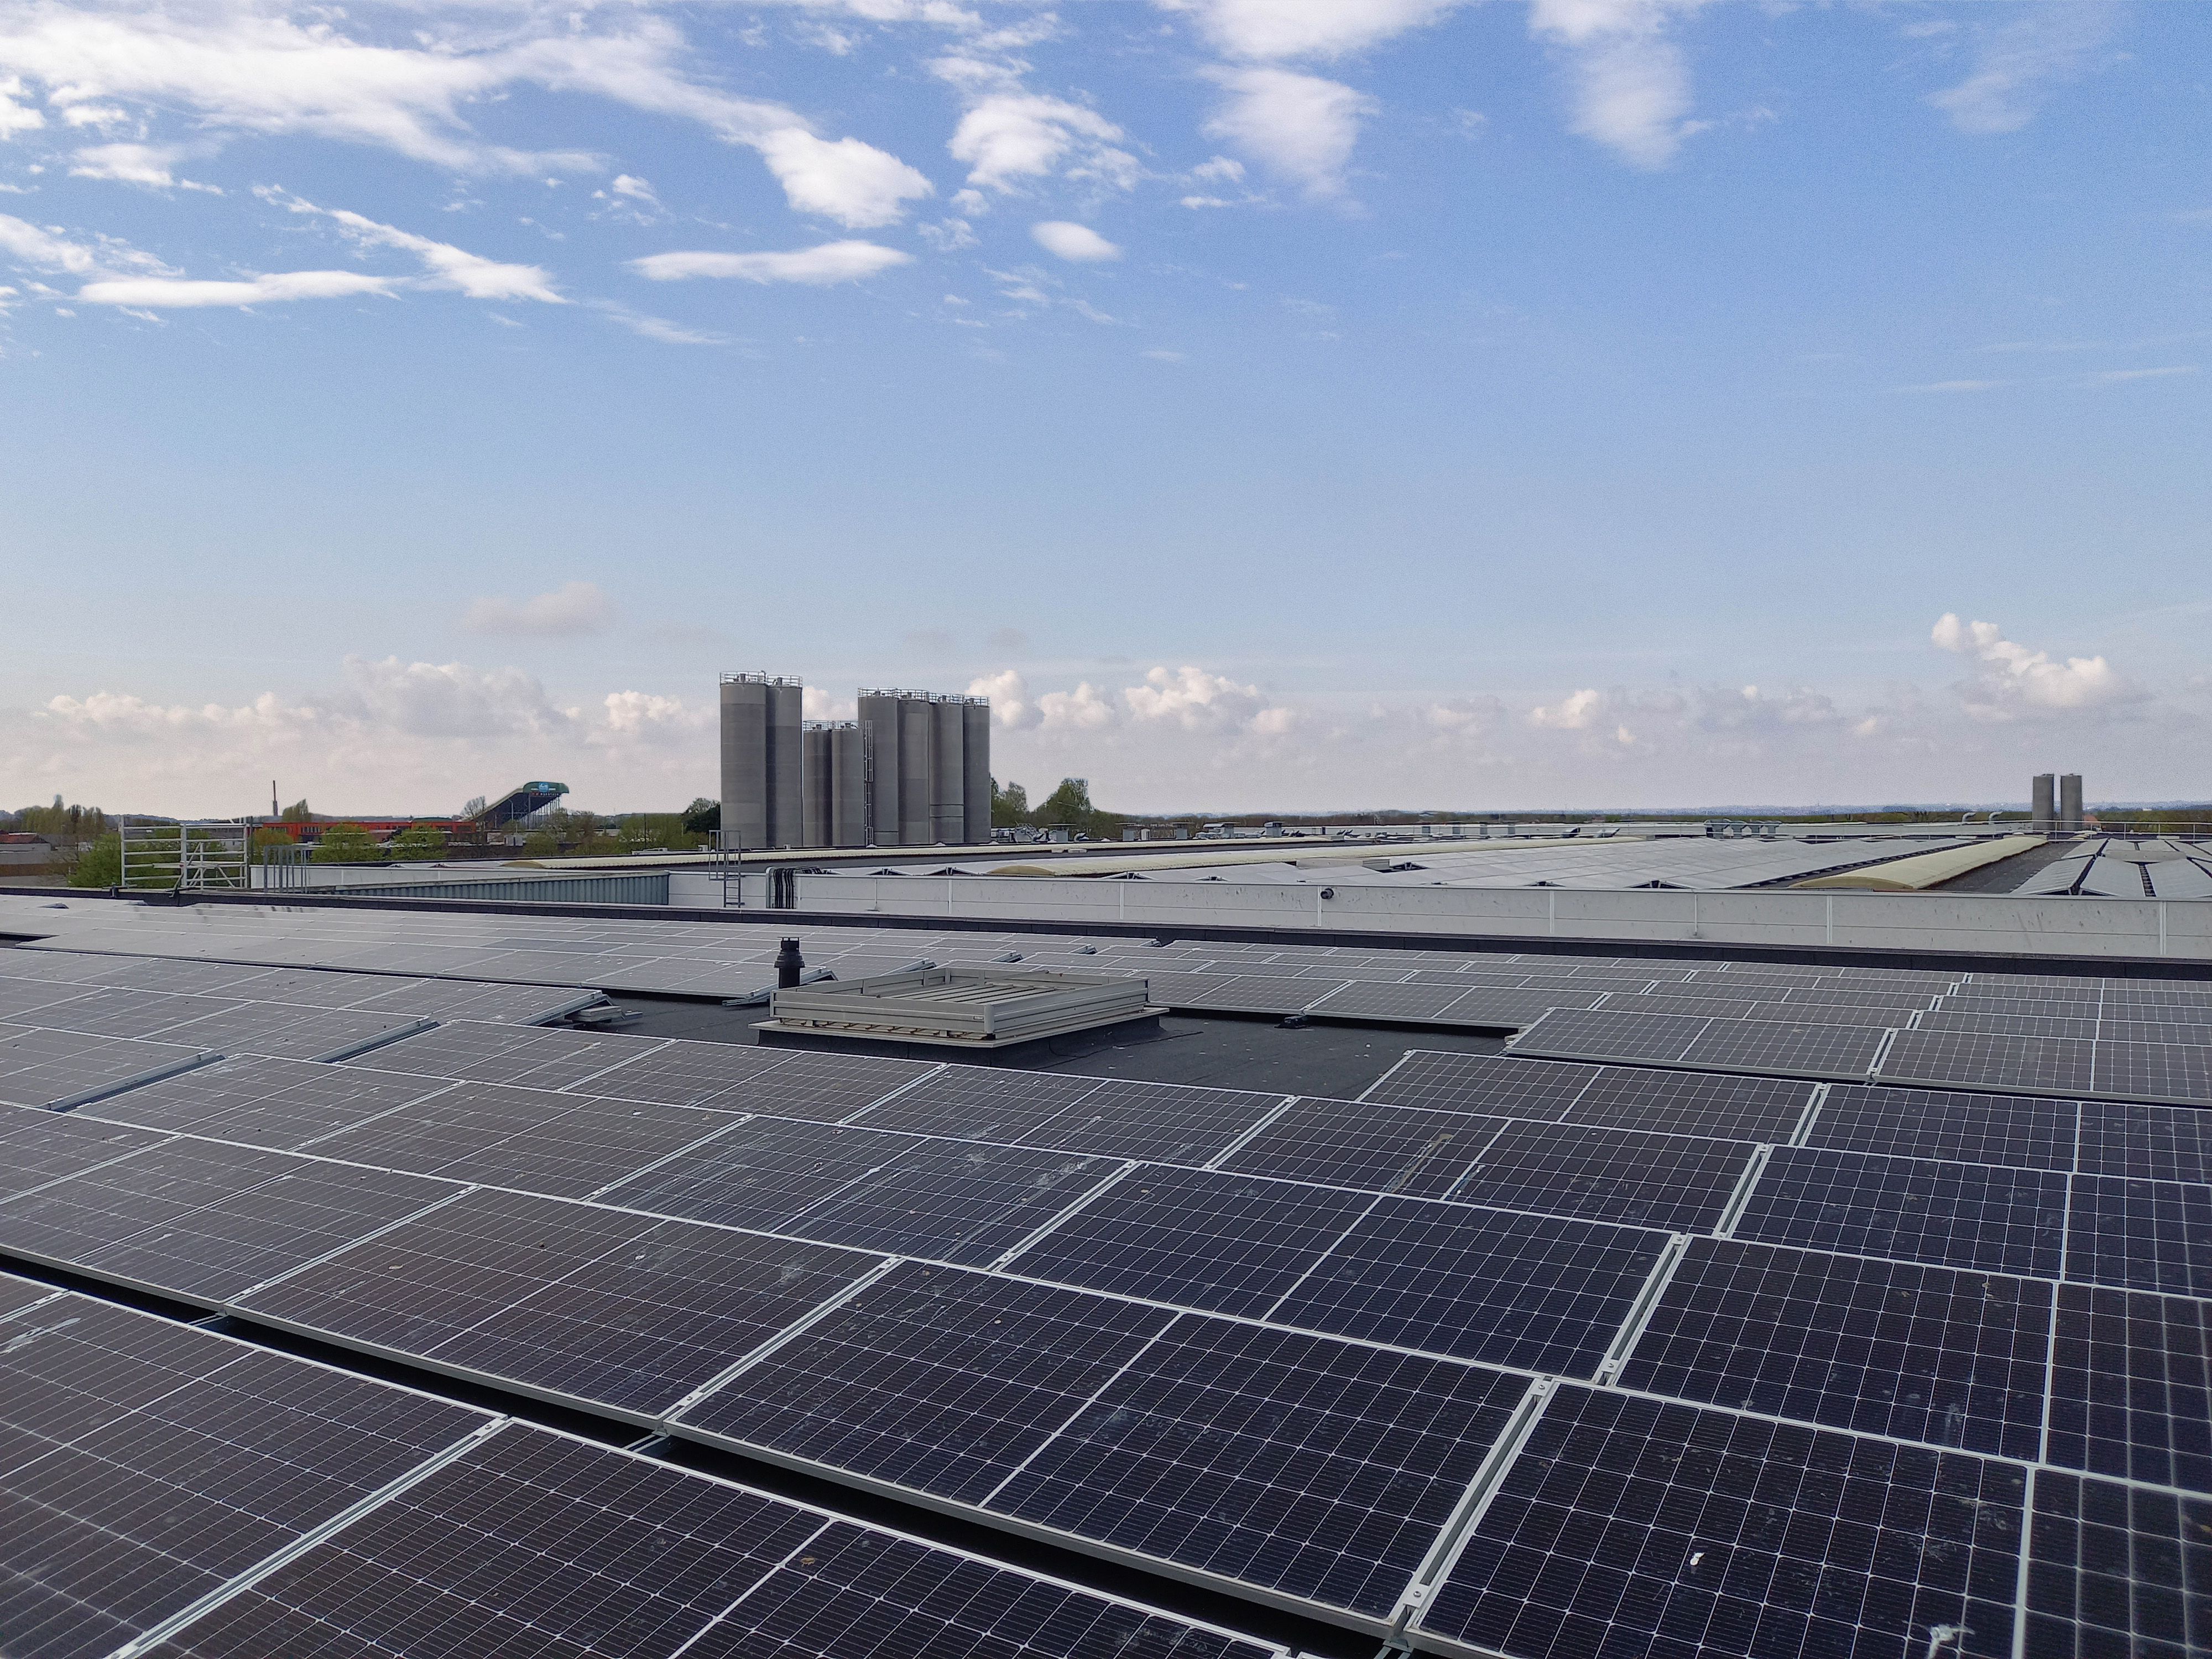 7,888 photovoltaic panels on our roof